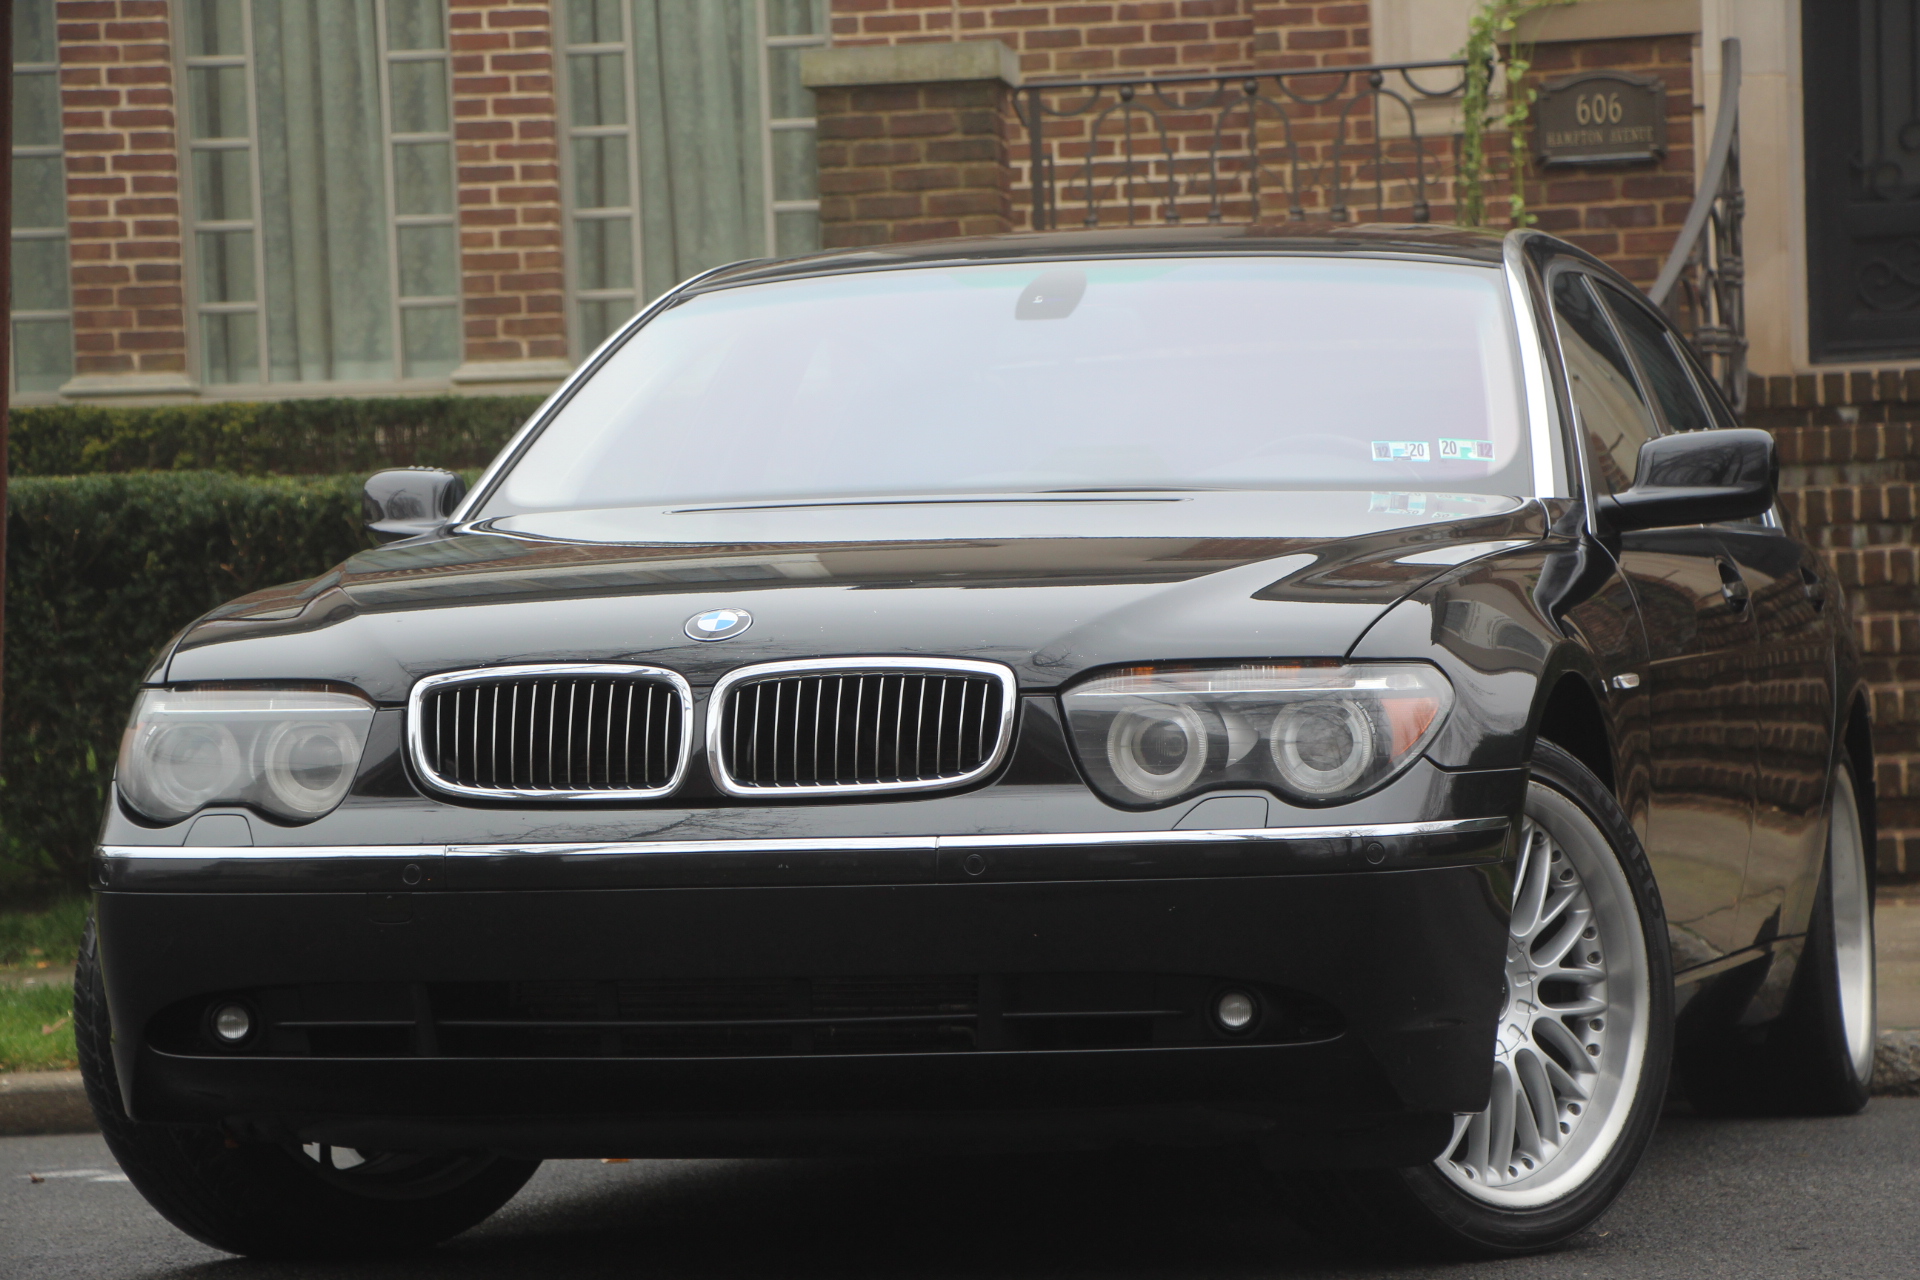 Buy Used 2004 BMW 745LI SPORT for $11 900 from trusted dealer in Brooklyn,  NY!